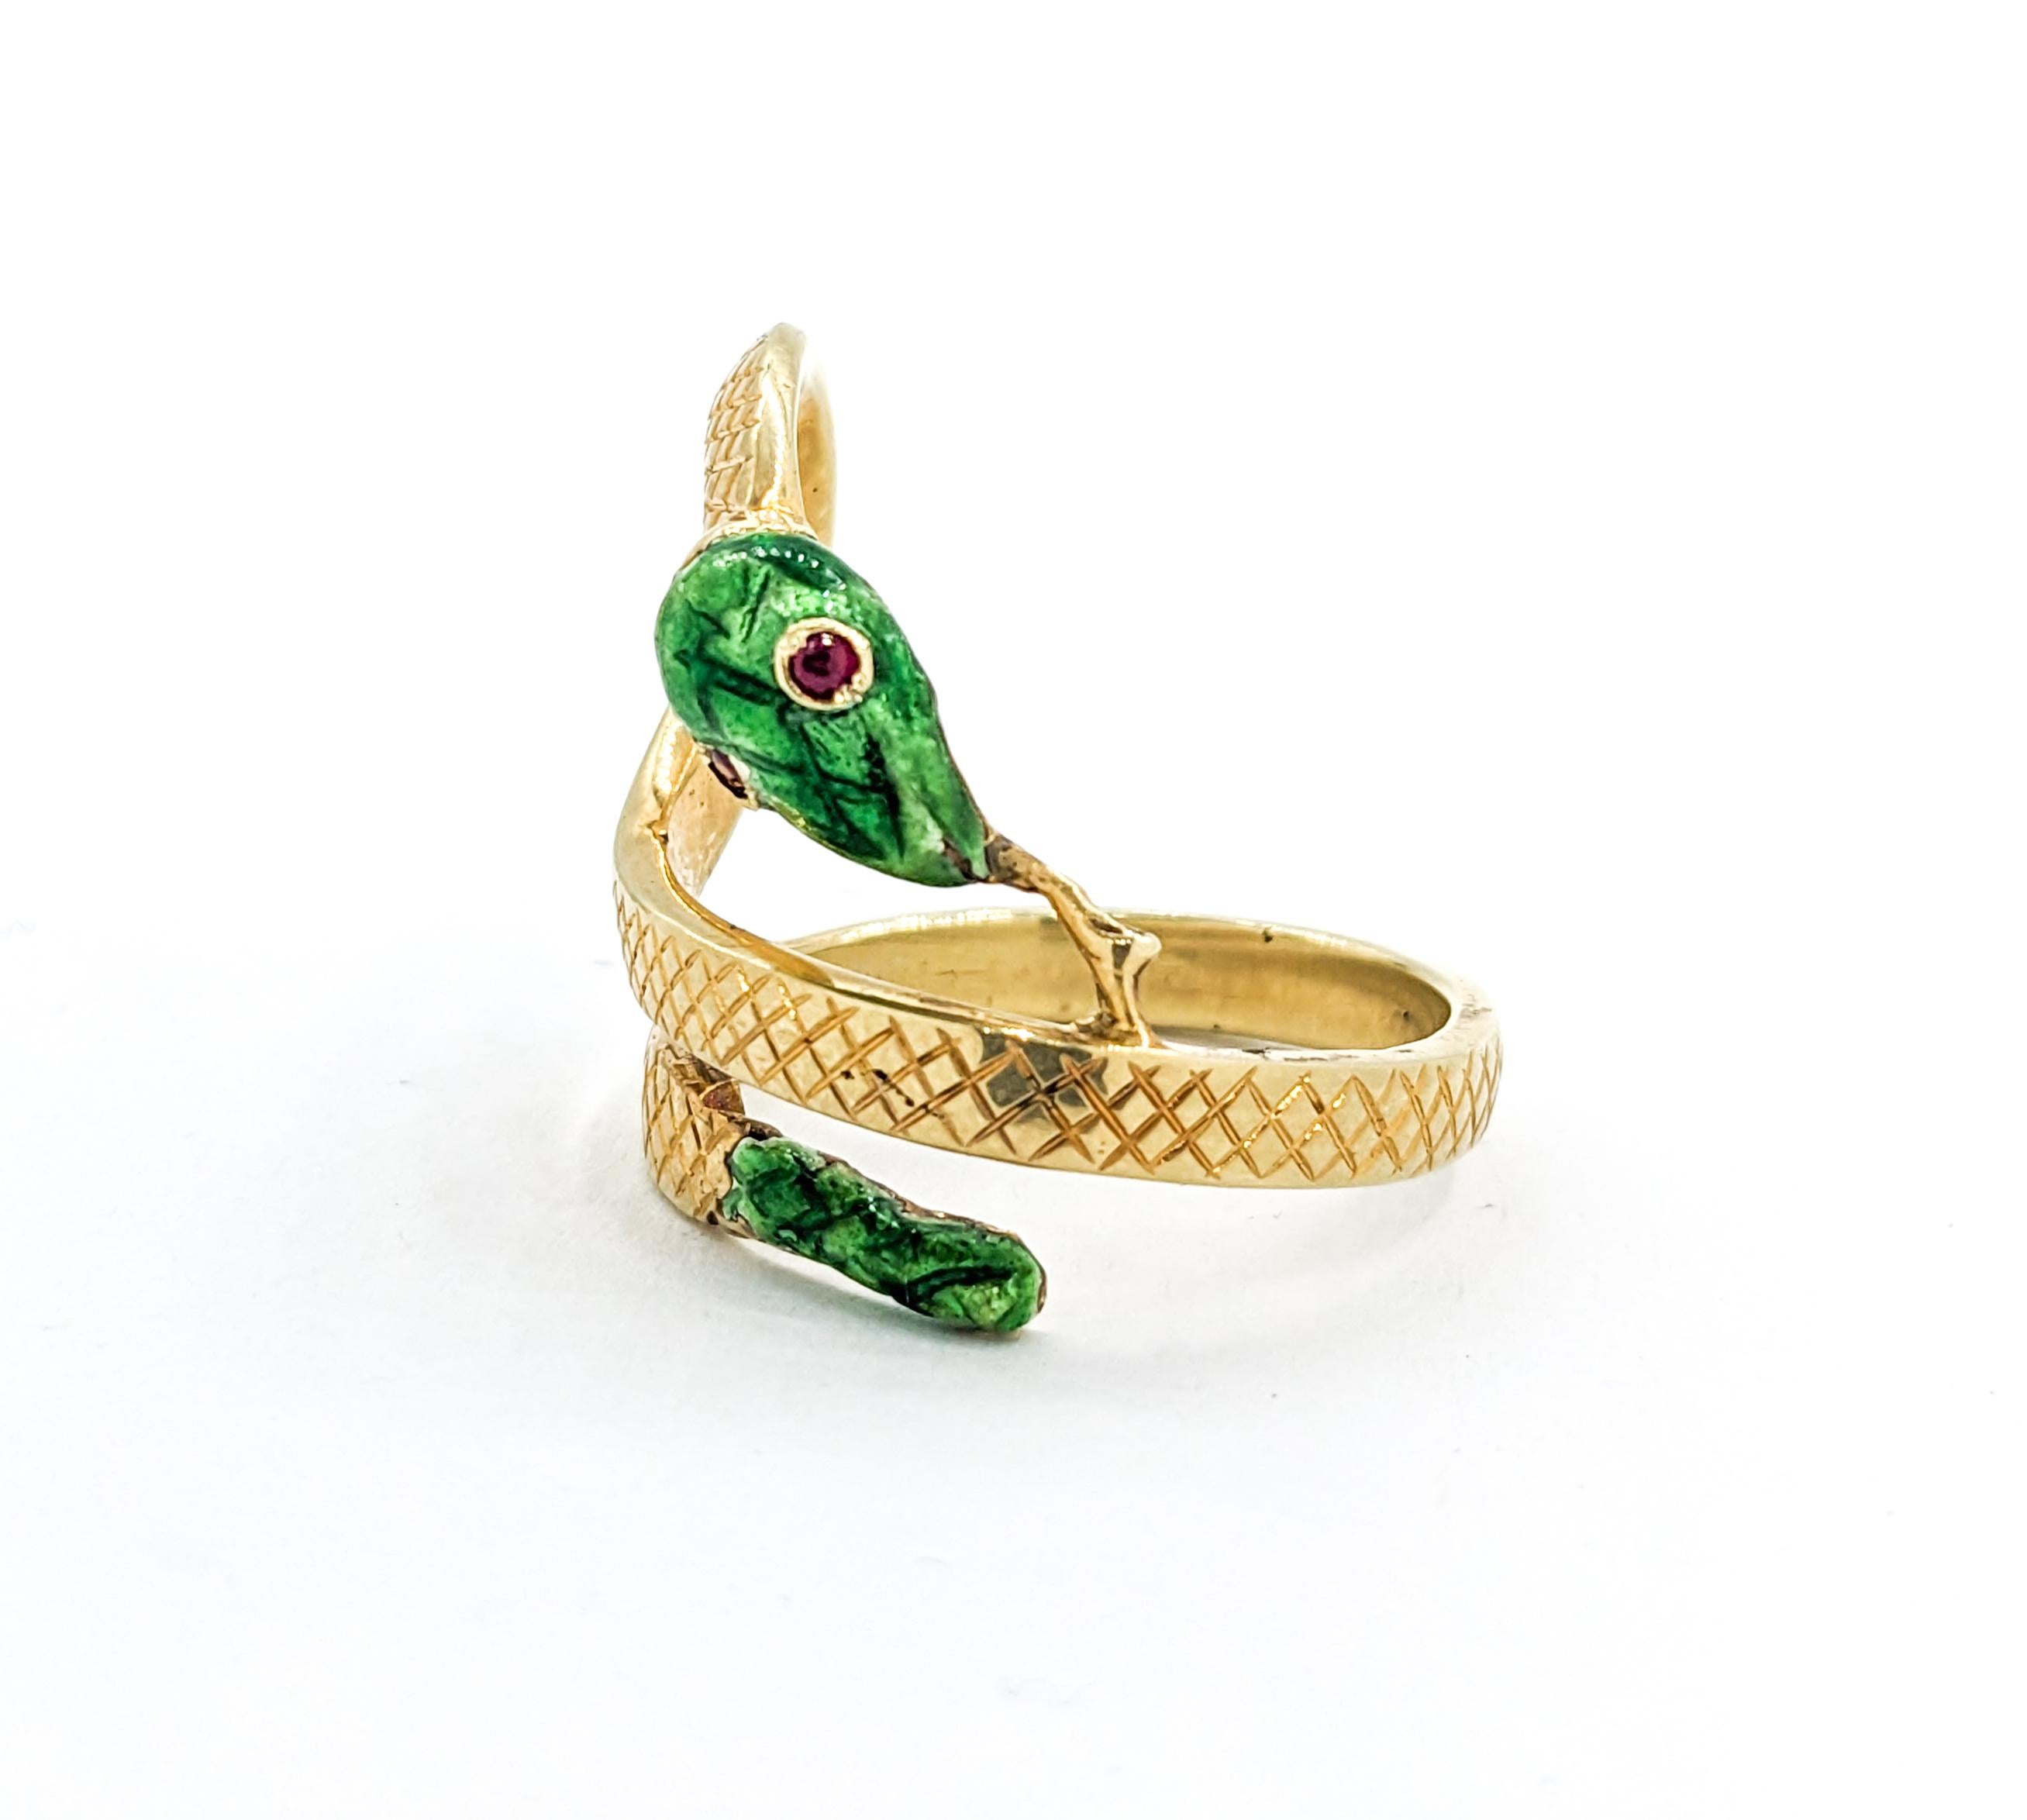 Vintage Green Enamel Snake Ring with Ruby Eyes In Yellow Gold In Excellent Condition For Sale In Bloomington, MN